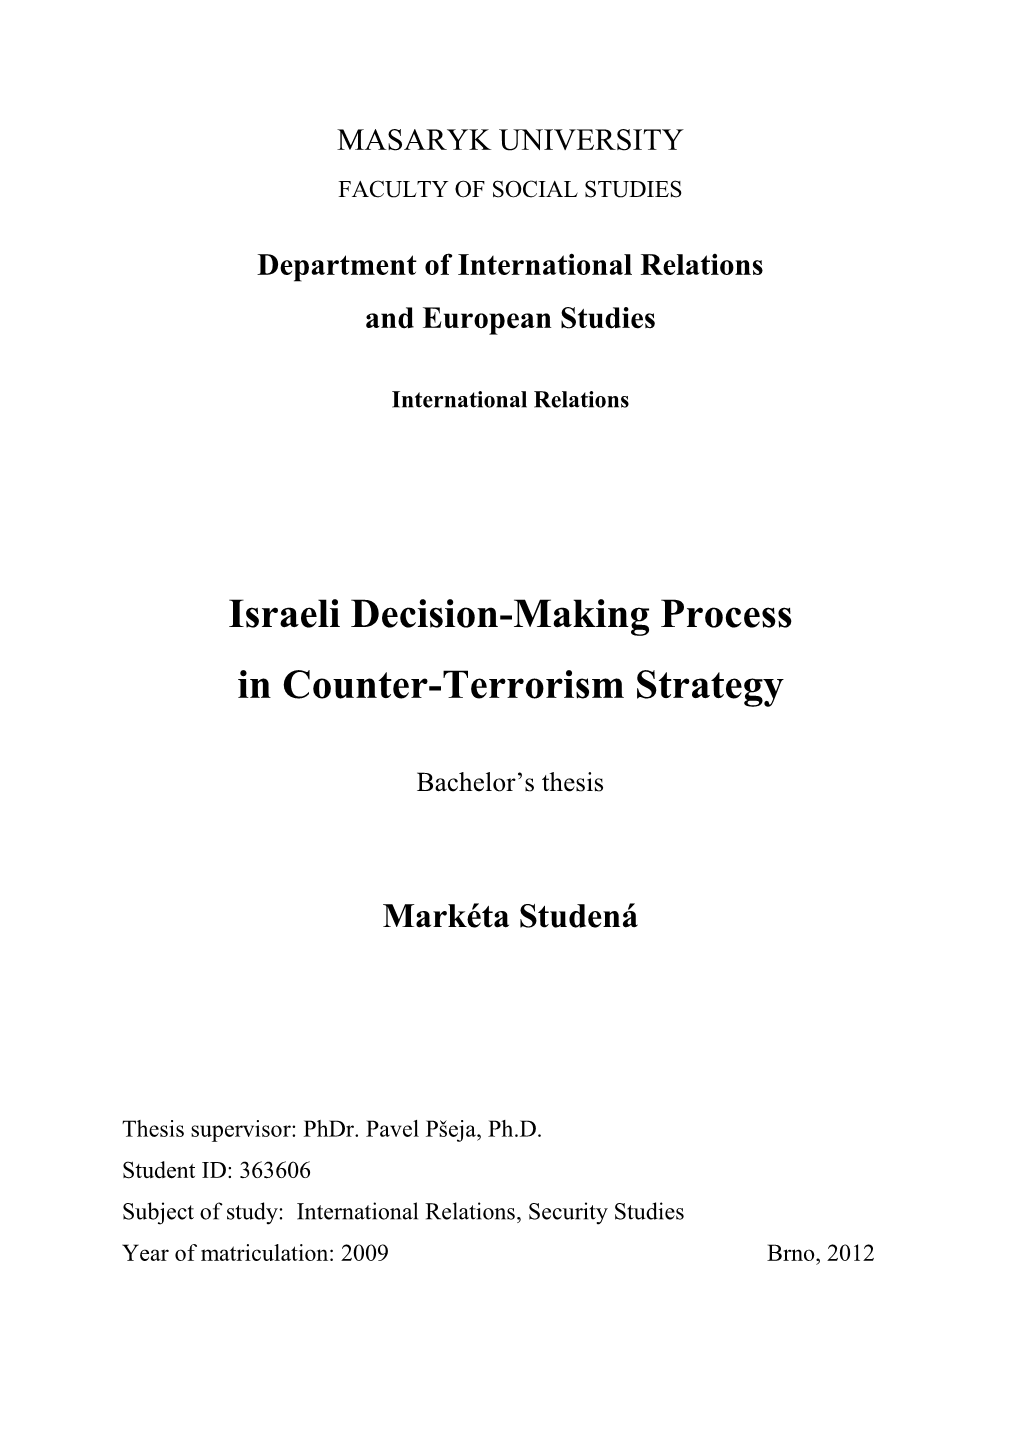 Israeli Decision-Making Process in Counter-Terrorism Strategy